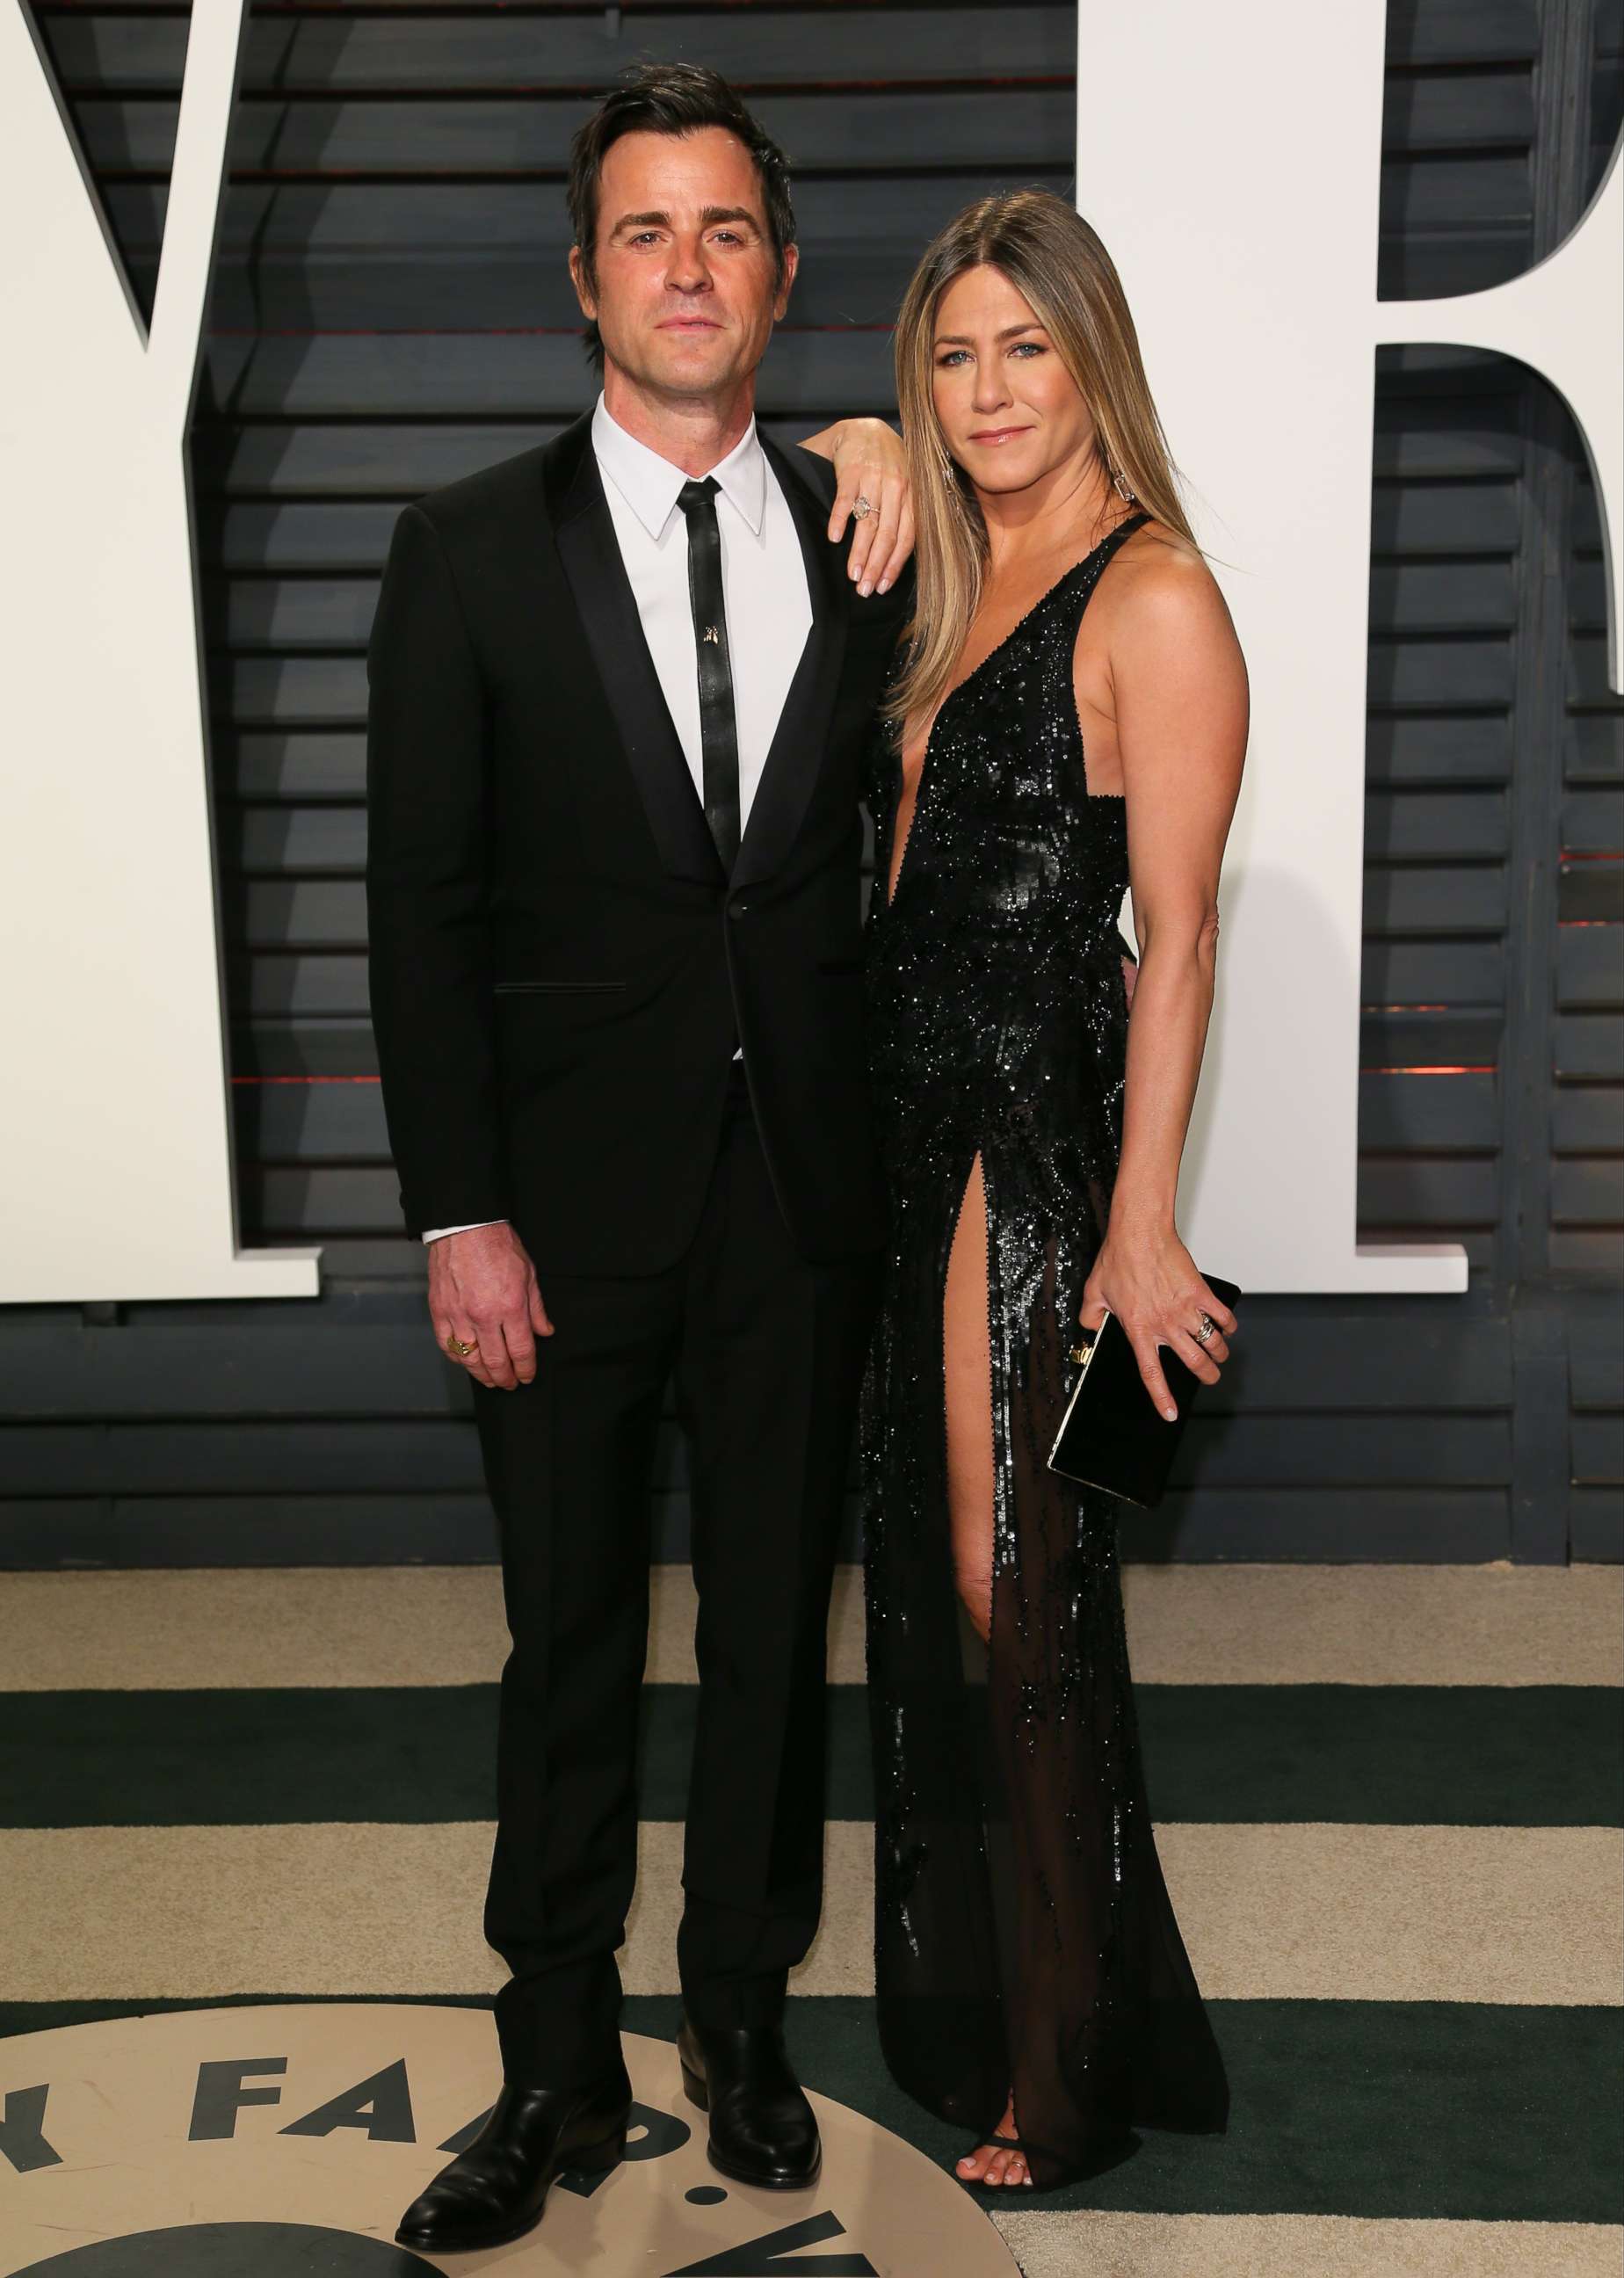 PHOTO: Justin Theroux and Jennifer Aniston attend the 2017 Vanity Fair Oscar Party hosted by Graydon Carter at Wallis Annenberg Center for the Performing Arts, Feb. 26, 2017, in Beverly Hills, Calif.